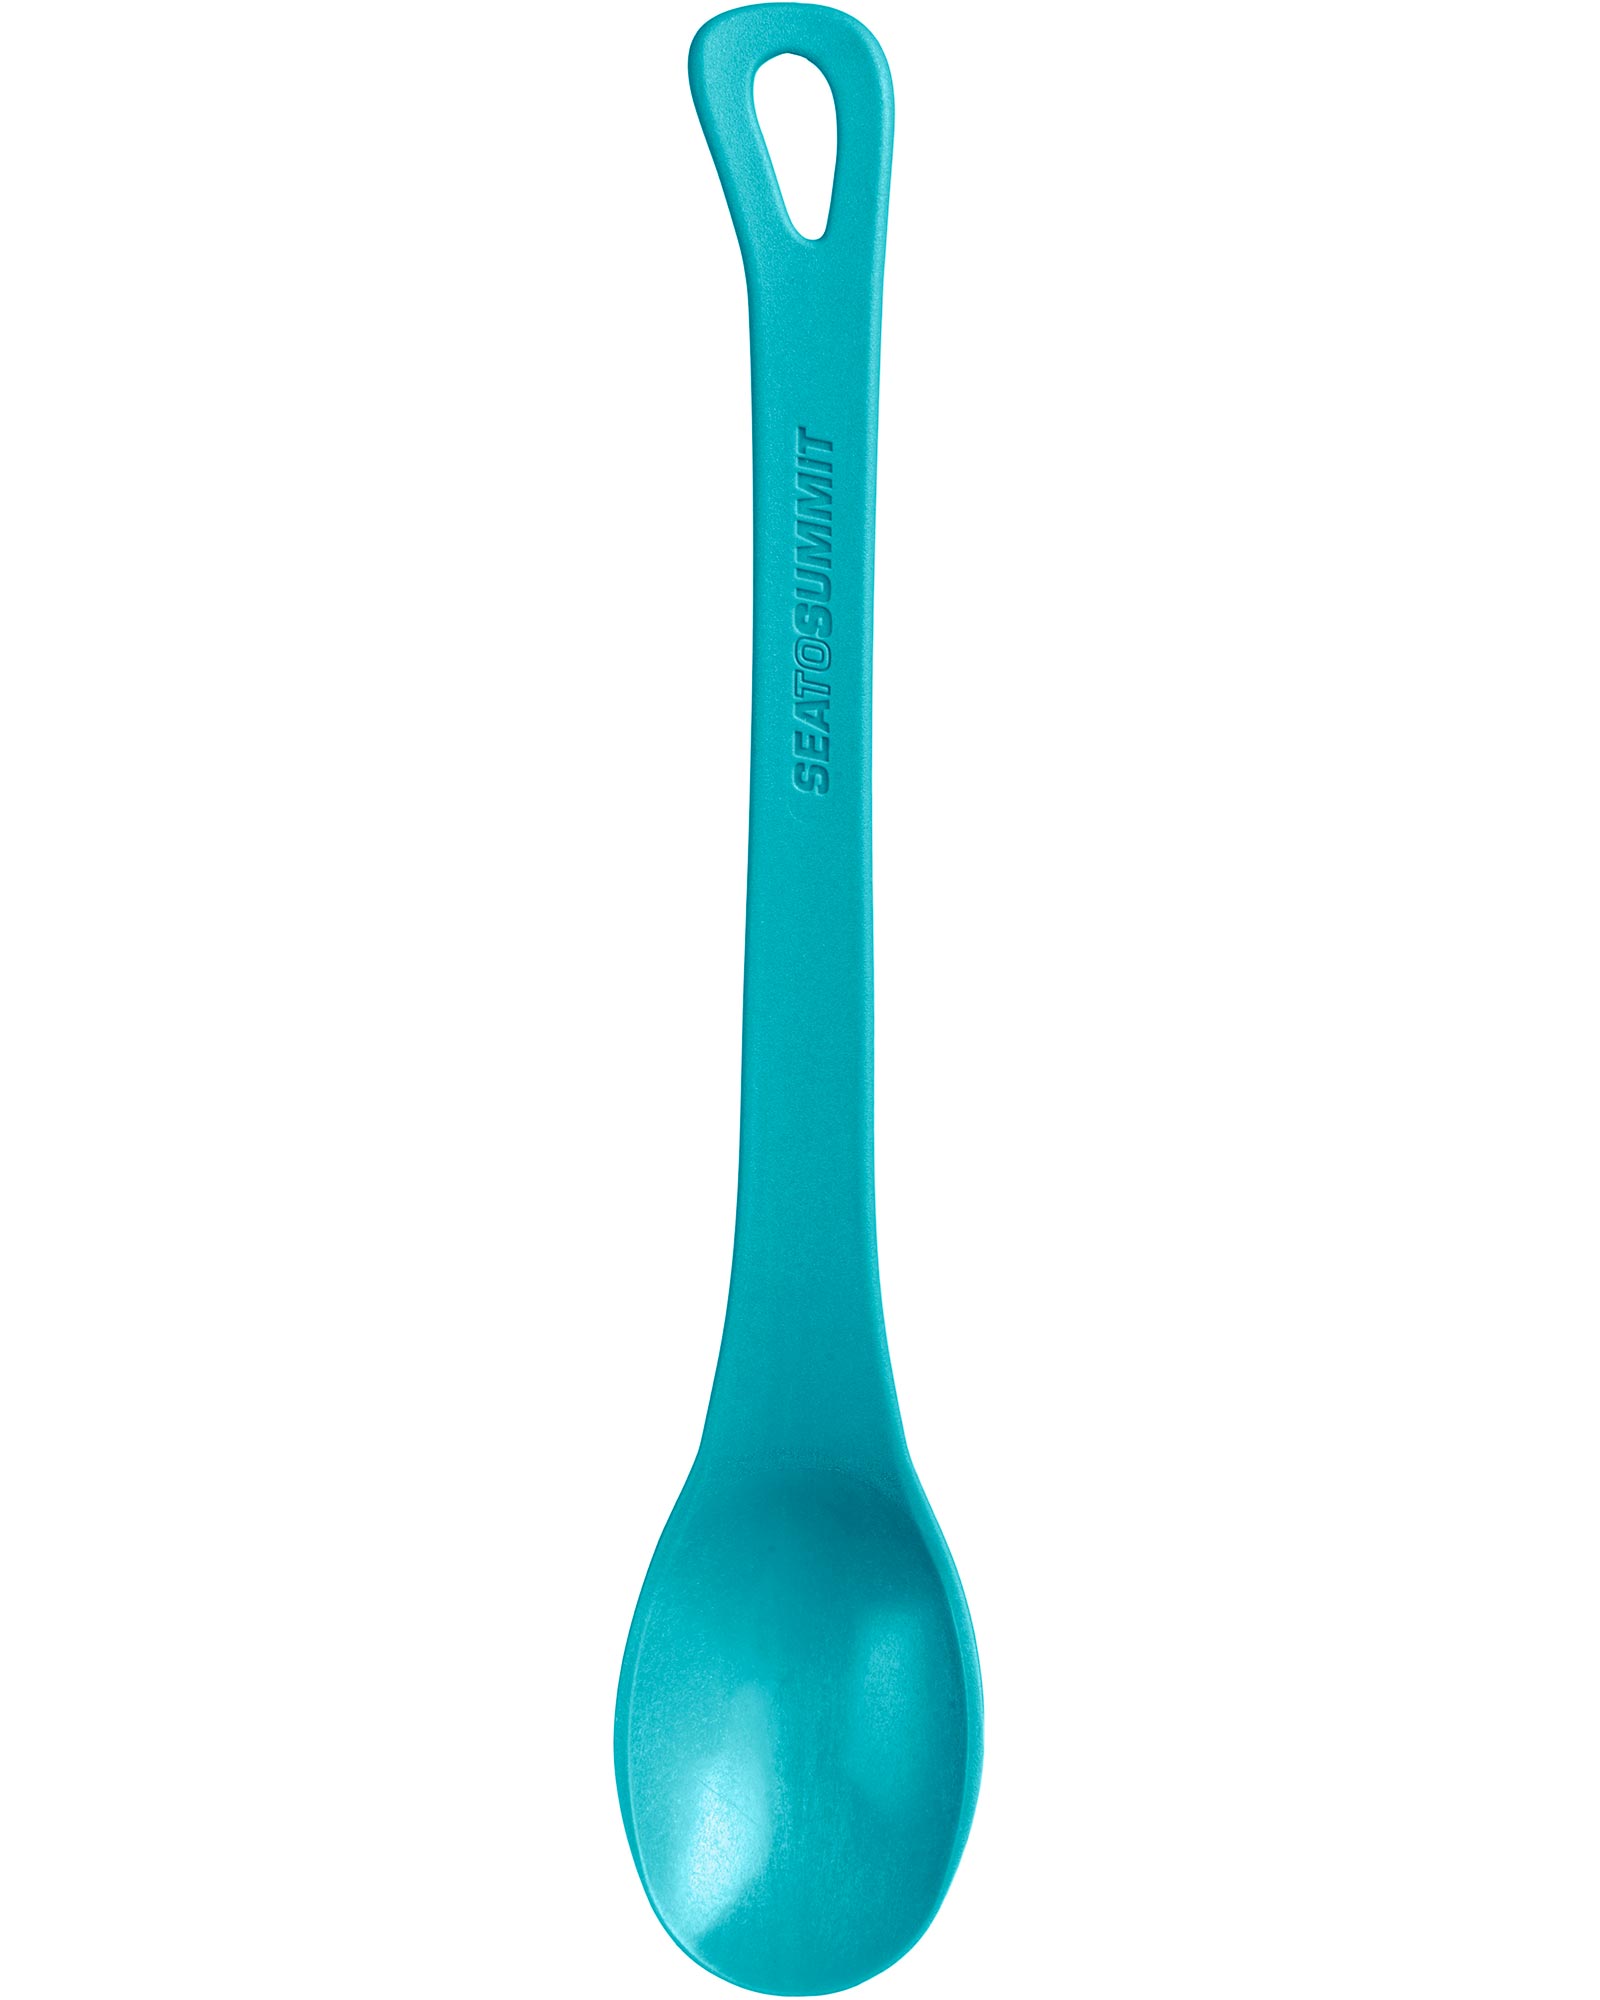 Sea to Summit Delta Long Handled Spoon - Pacific Blue